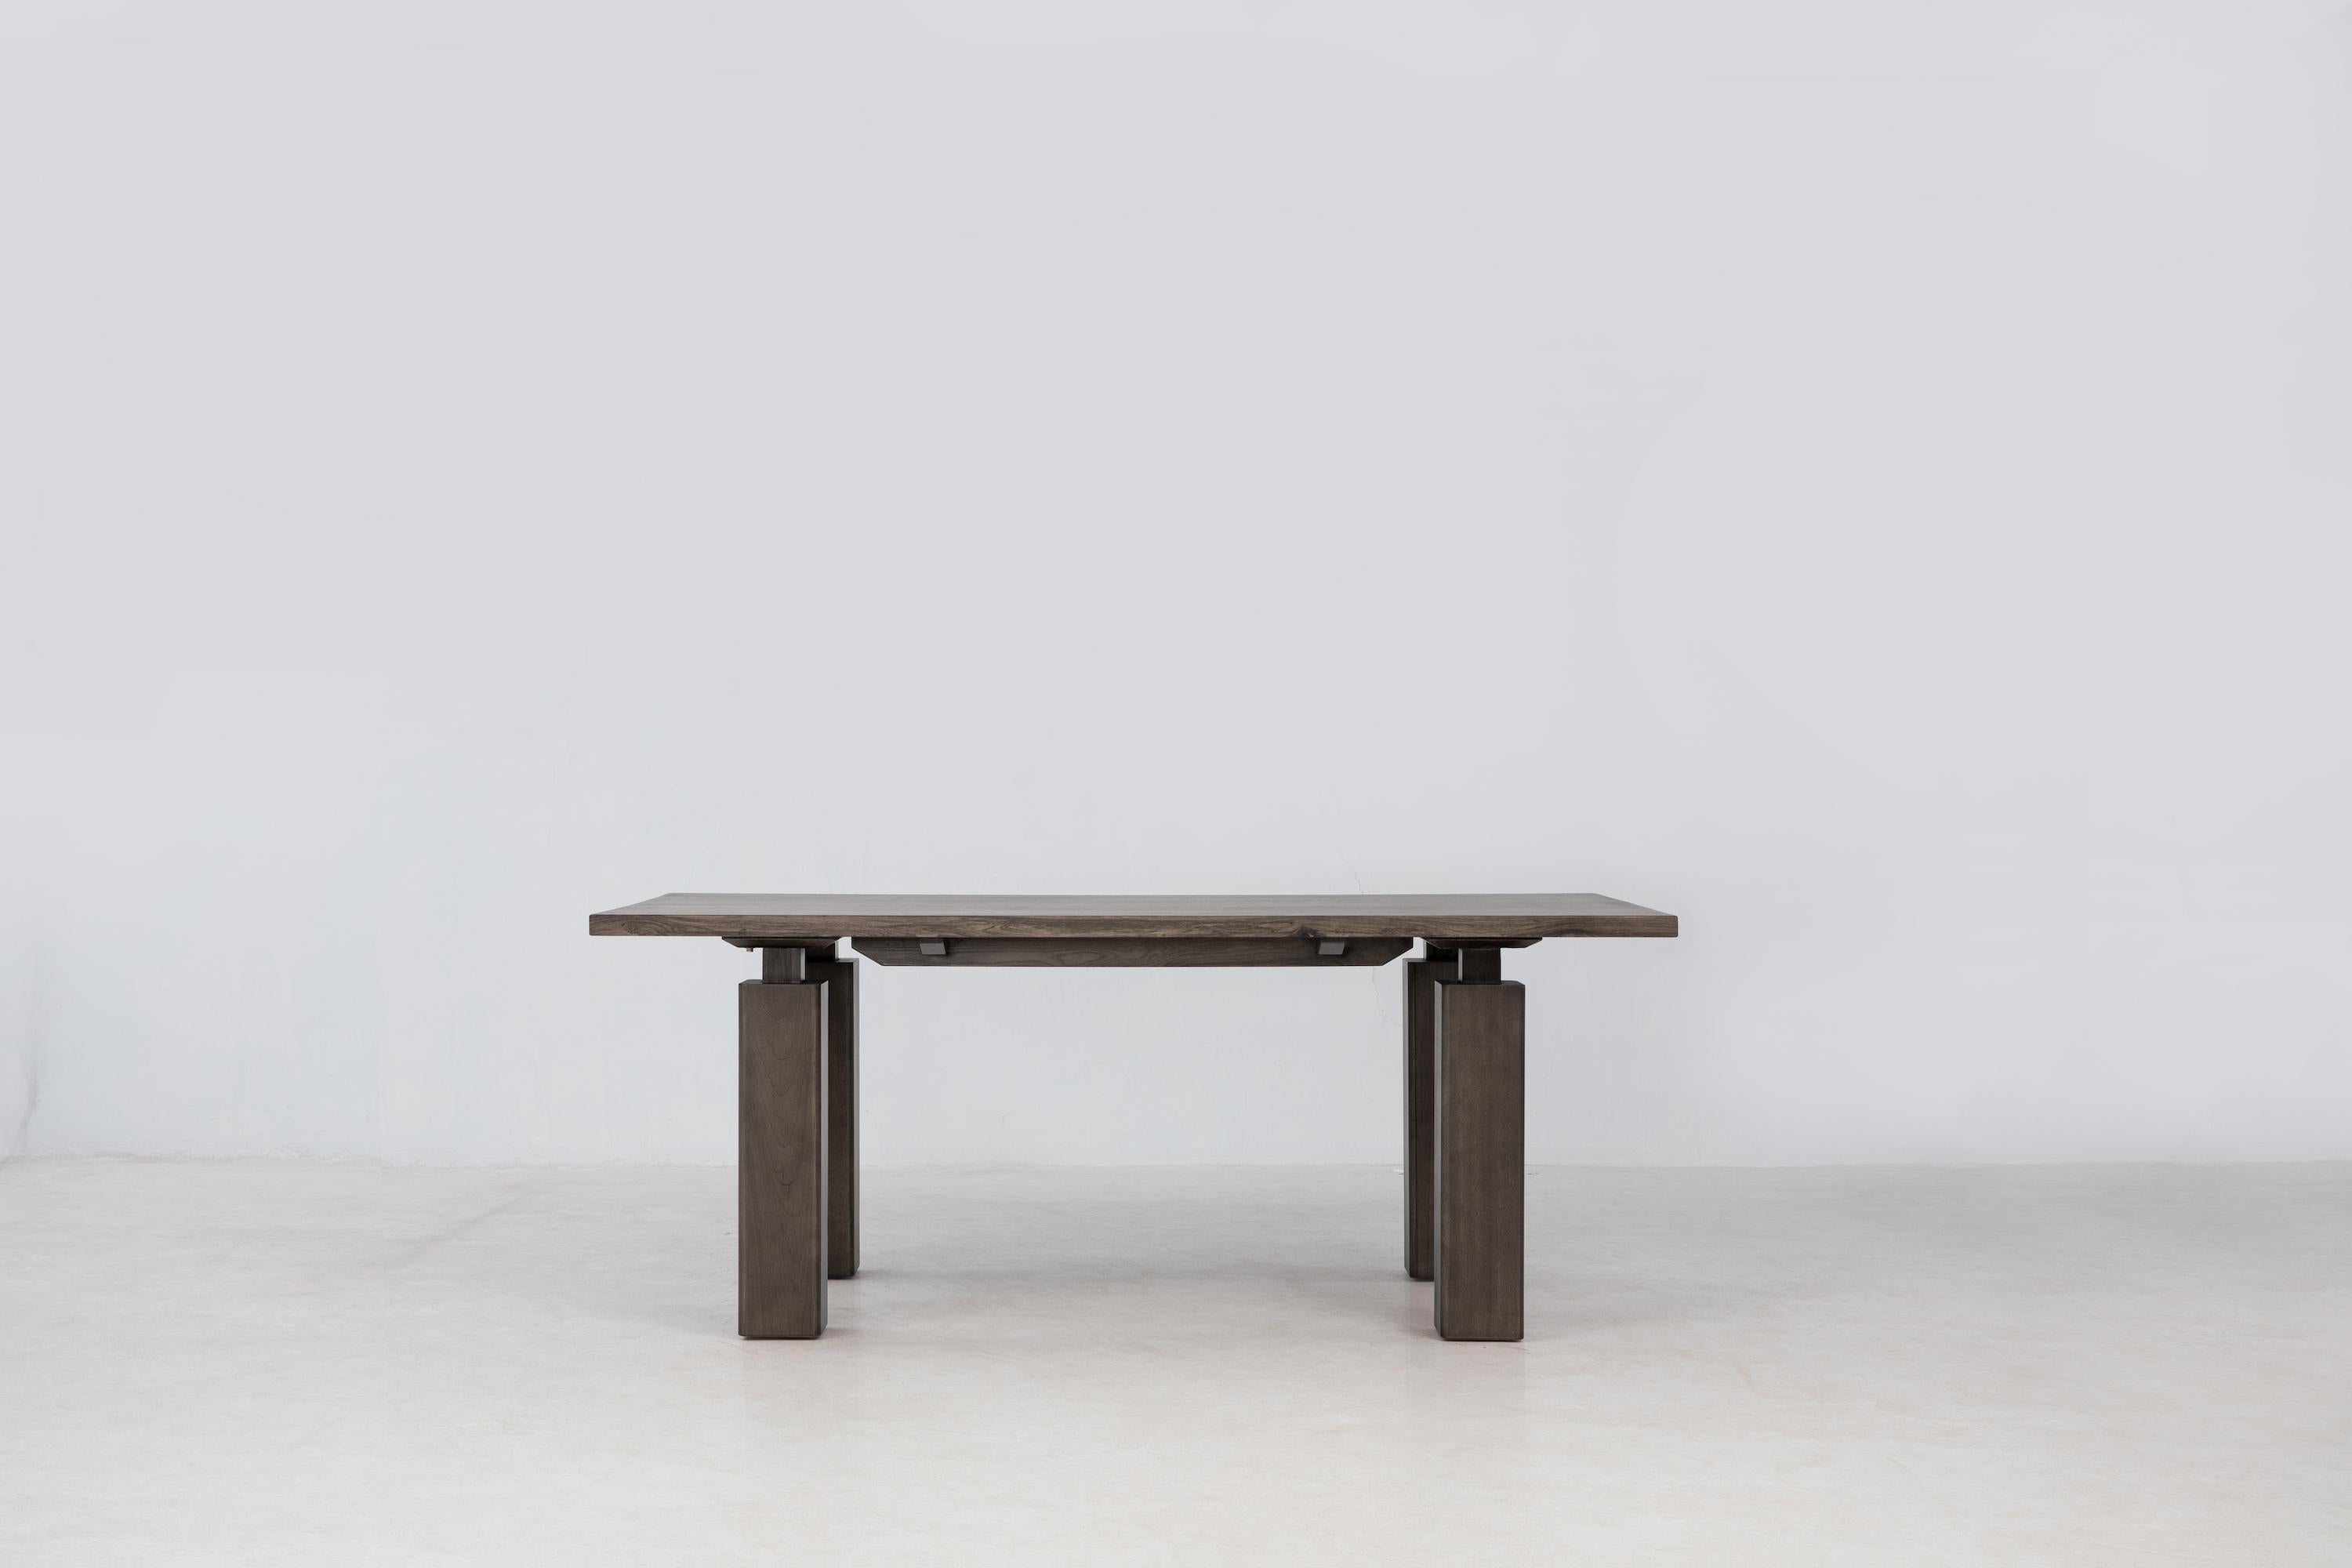 

The Wolo Dining Table features the beautiful grain and luminescent sheen of Makata Wood, focusing on contrast as a guiding concept. The columnar legs feature thick legs attached with thin connective tissue for a sculptural feel. The simple